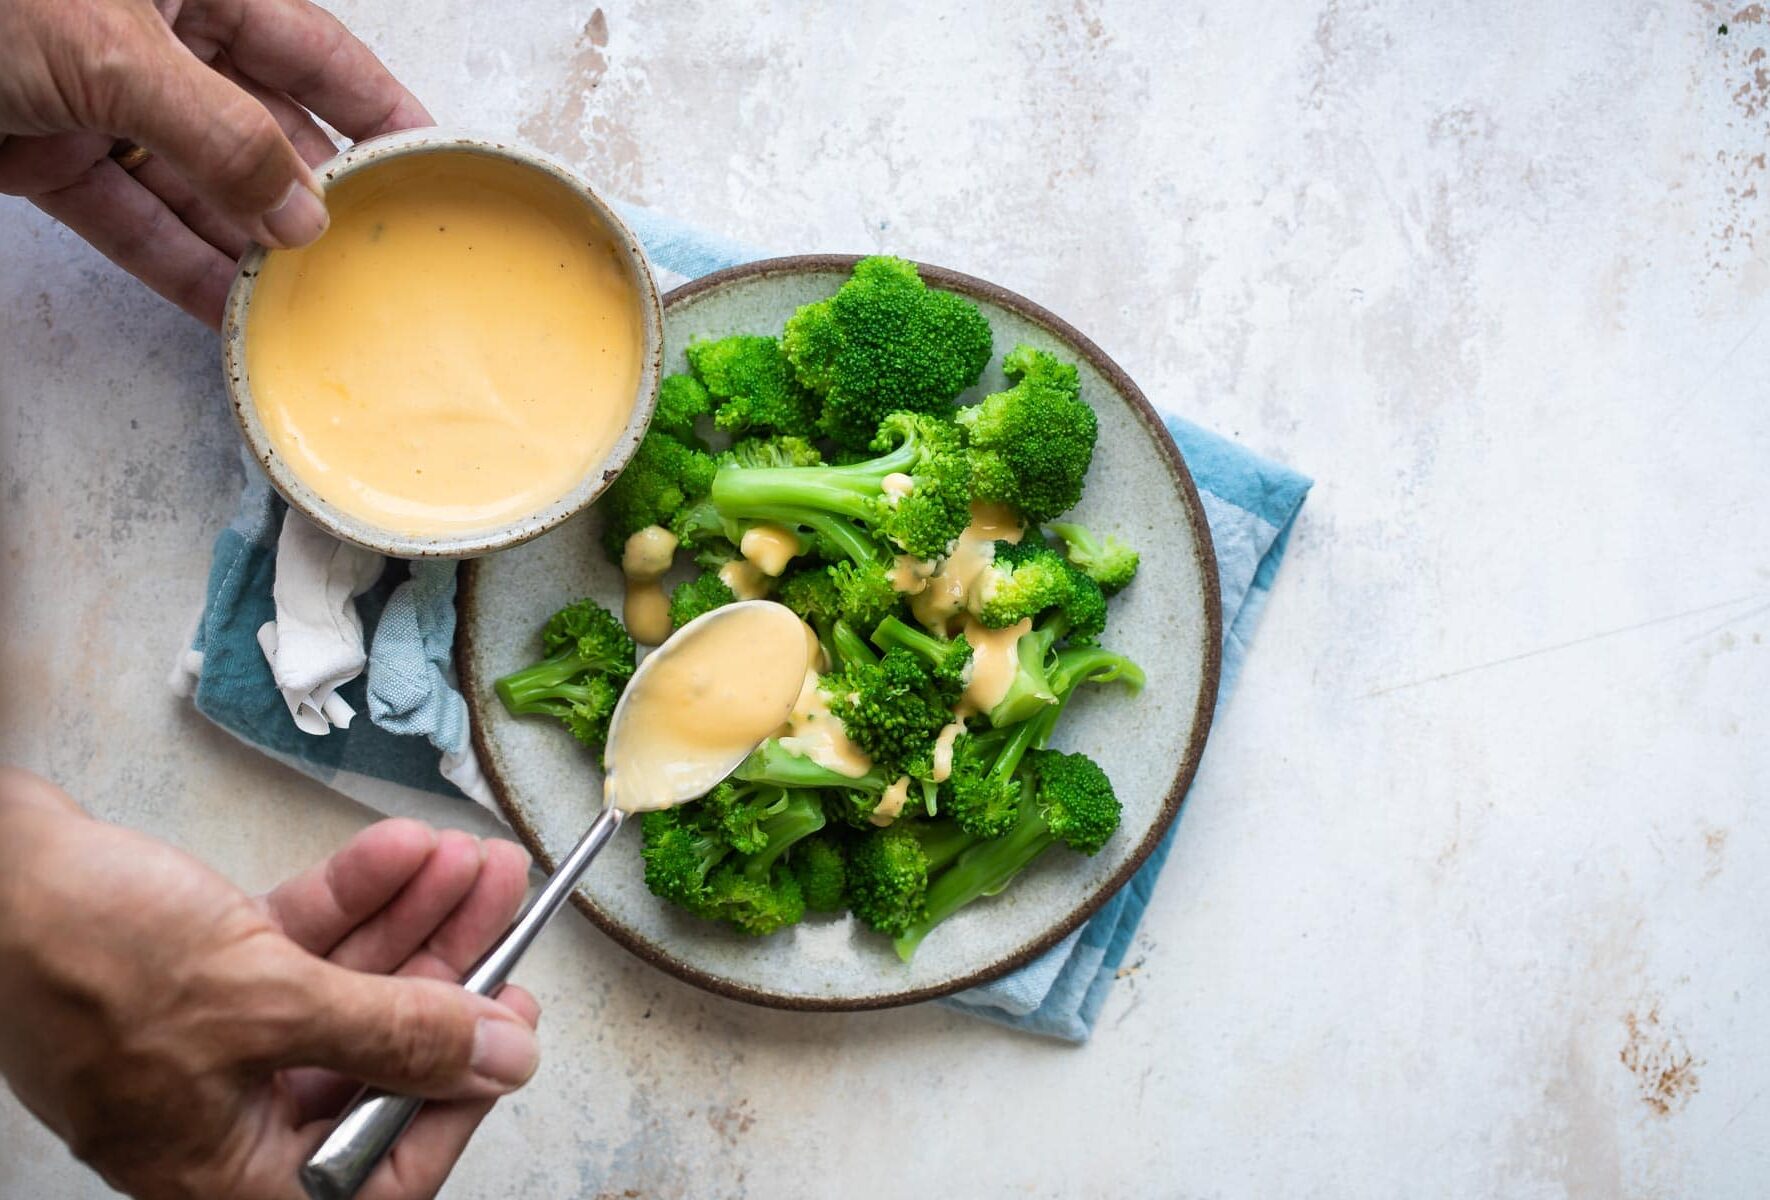 Drizzling cheese sauce over broccoli.